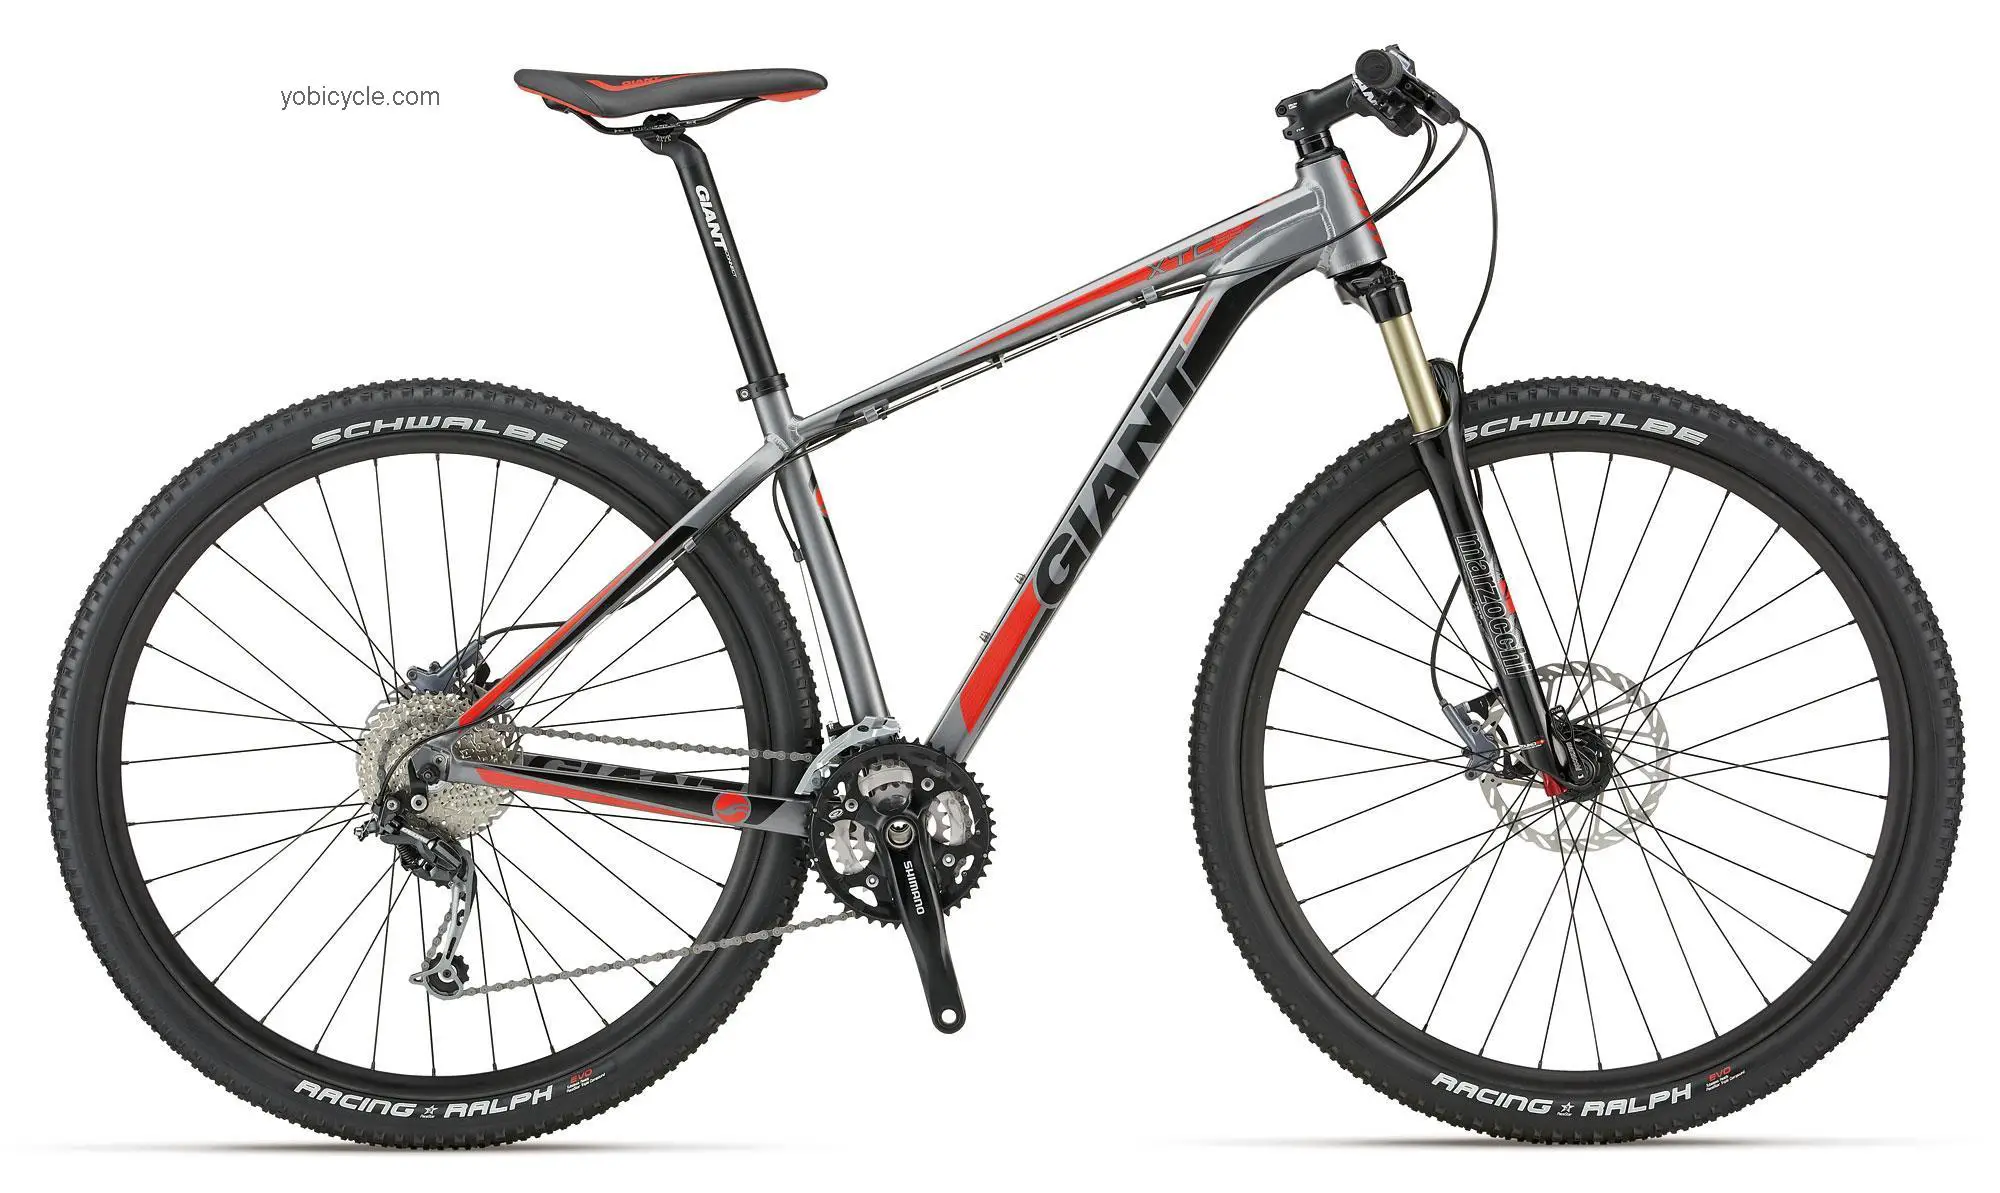 Giant XTC 29er 2 2012 comparison online with competitors